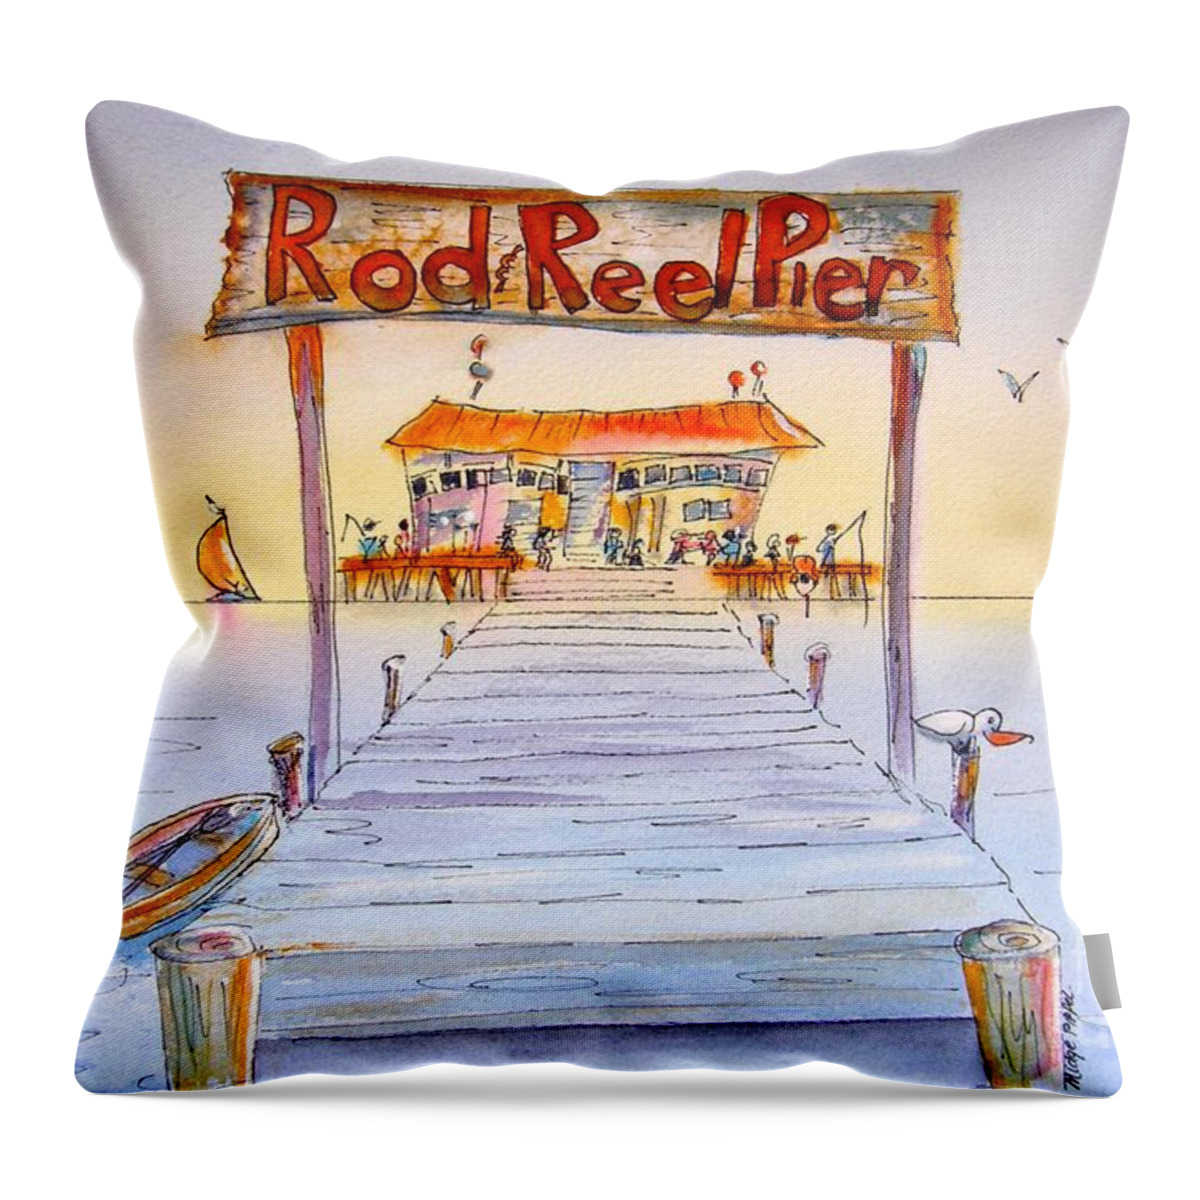 Calendar Throw Pillow featuring the painting Rod And Reel Pier by Midge Pippel